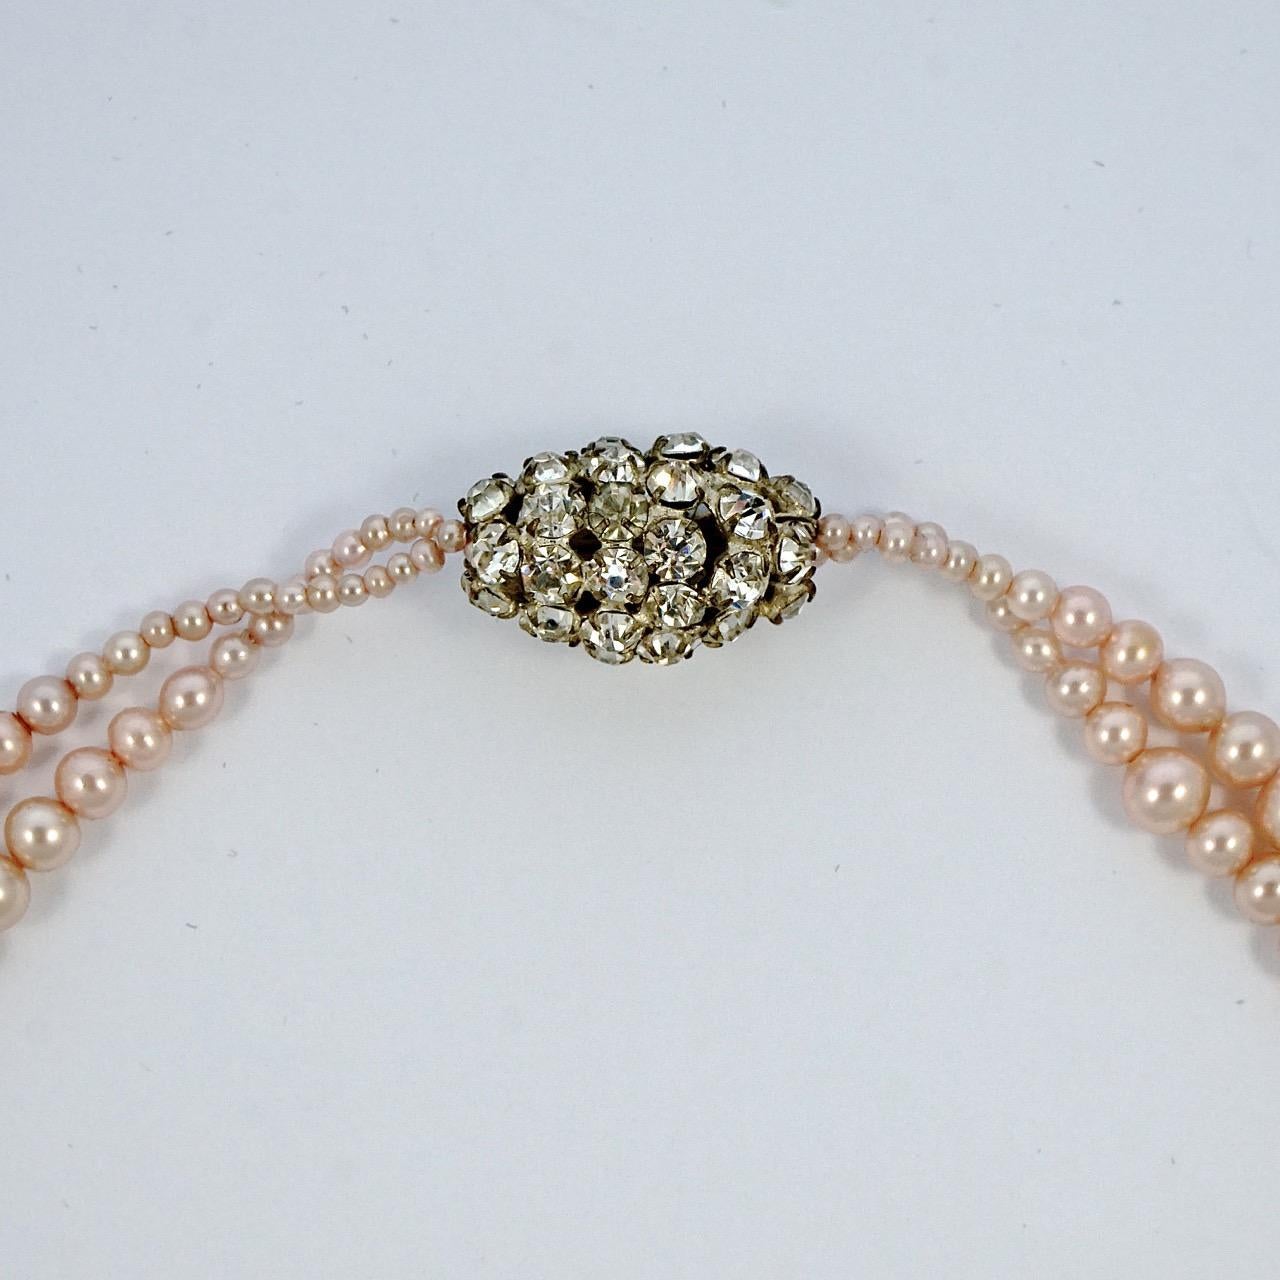 Art Deco pale pink faux pearl sautoir necklace featuring a beautiful rhinestone bead. This is a small necklace when fastened, though the length is adjustable. The necklace measures a total length of 49cm / 19.3 inches. The necklace is in very good